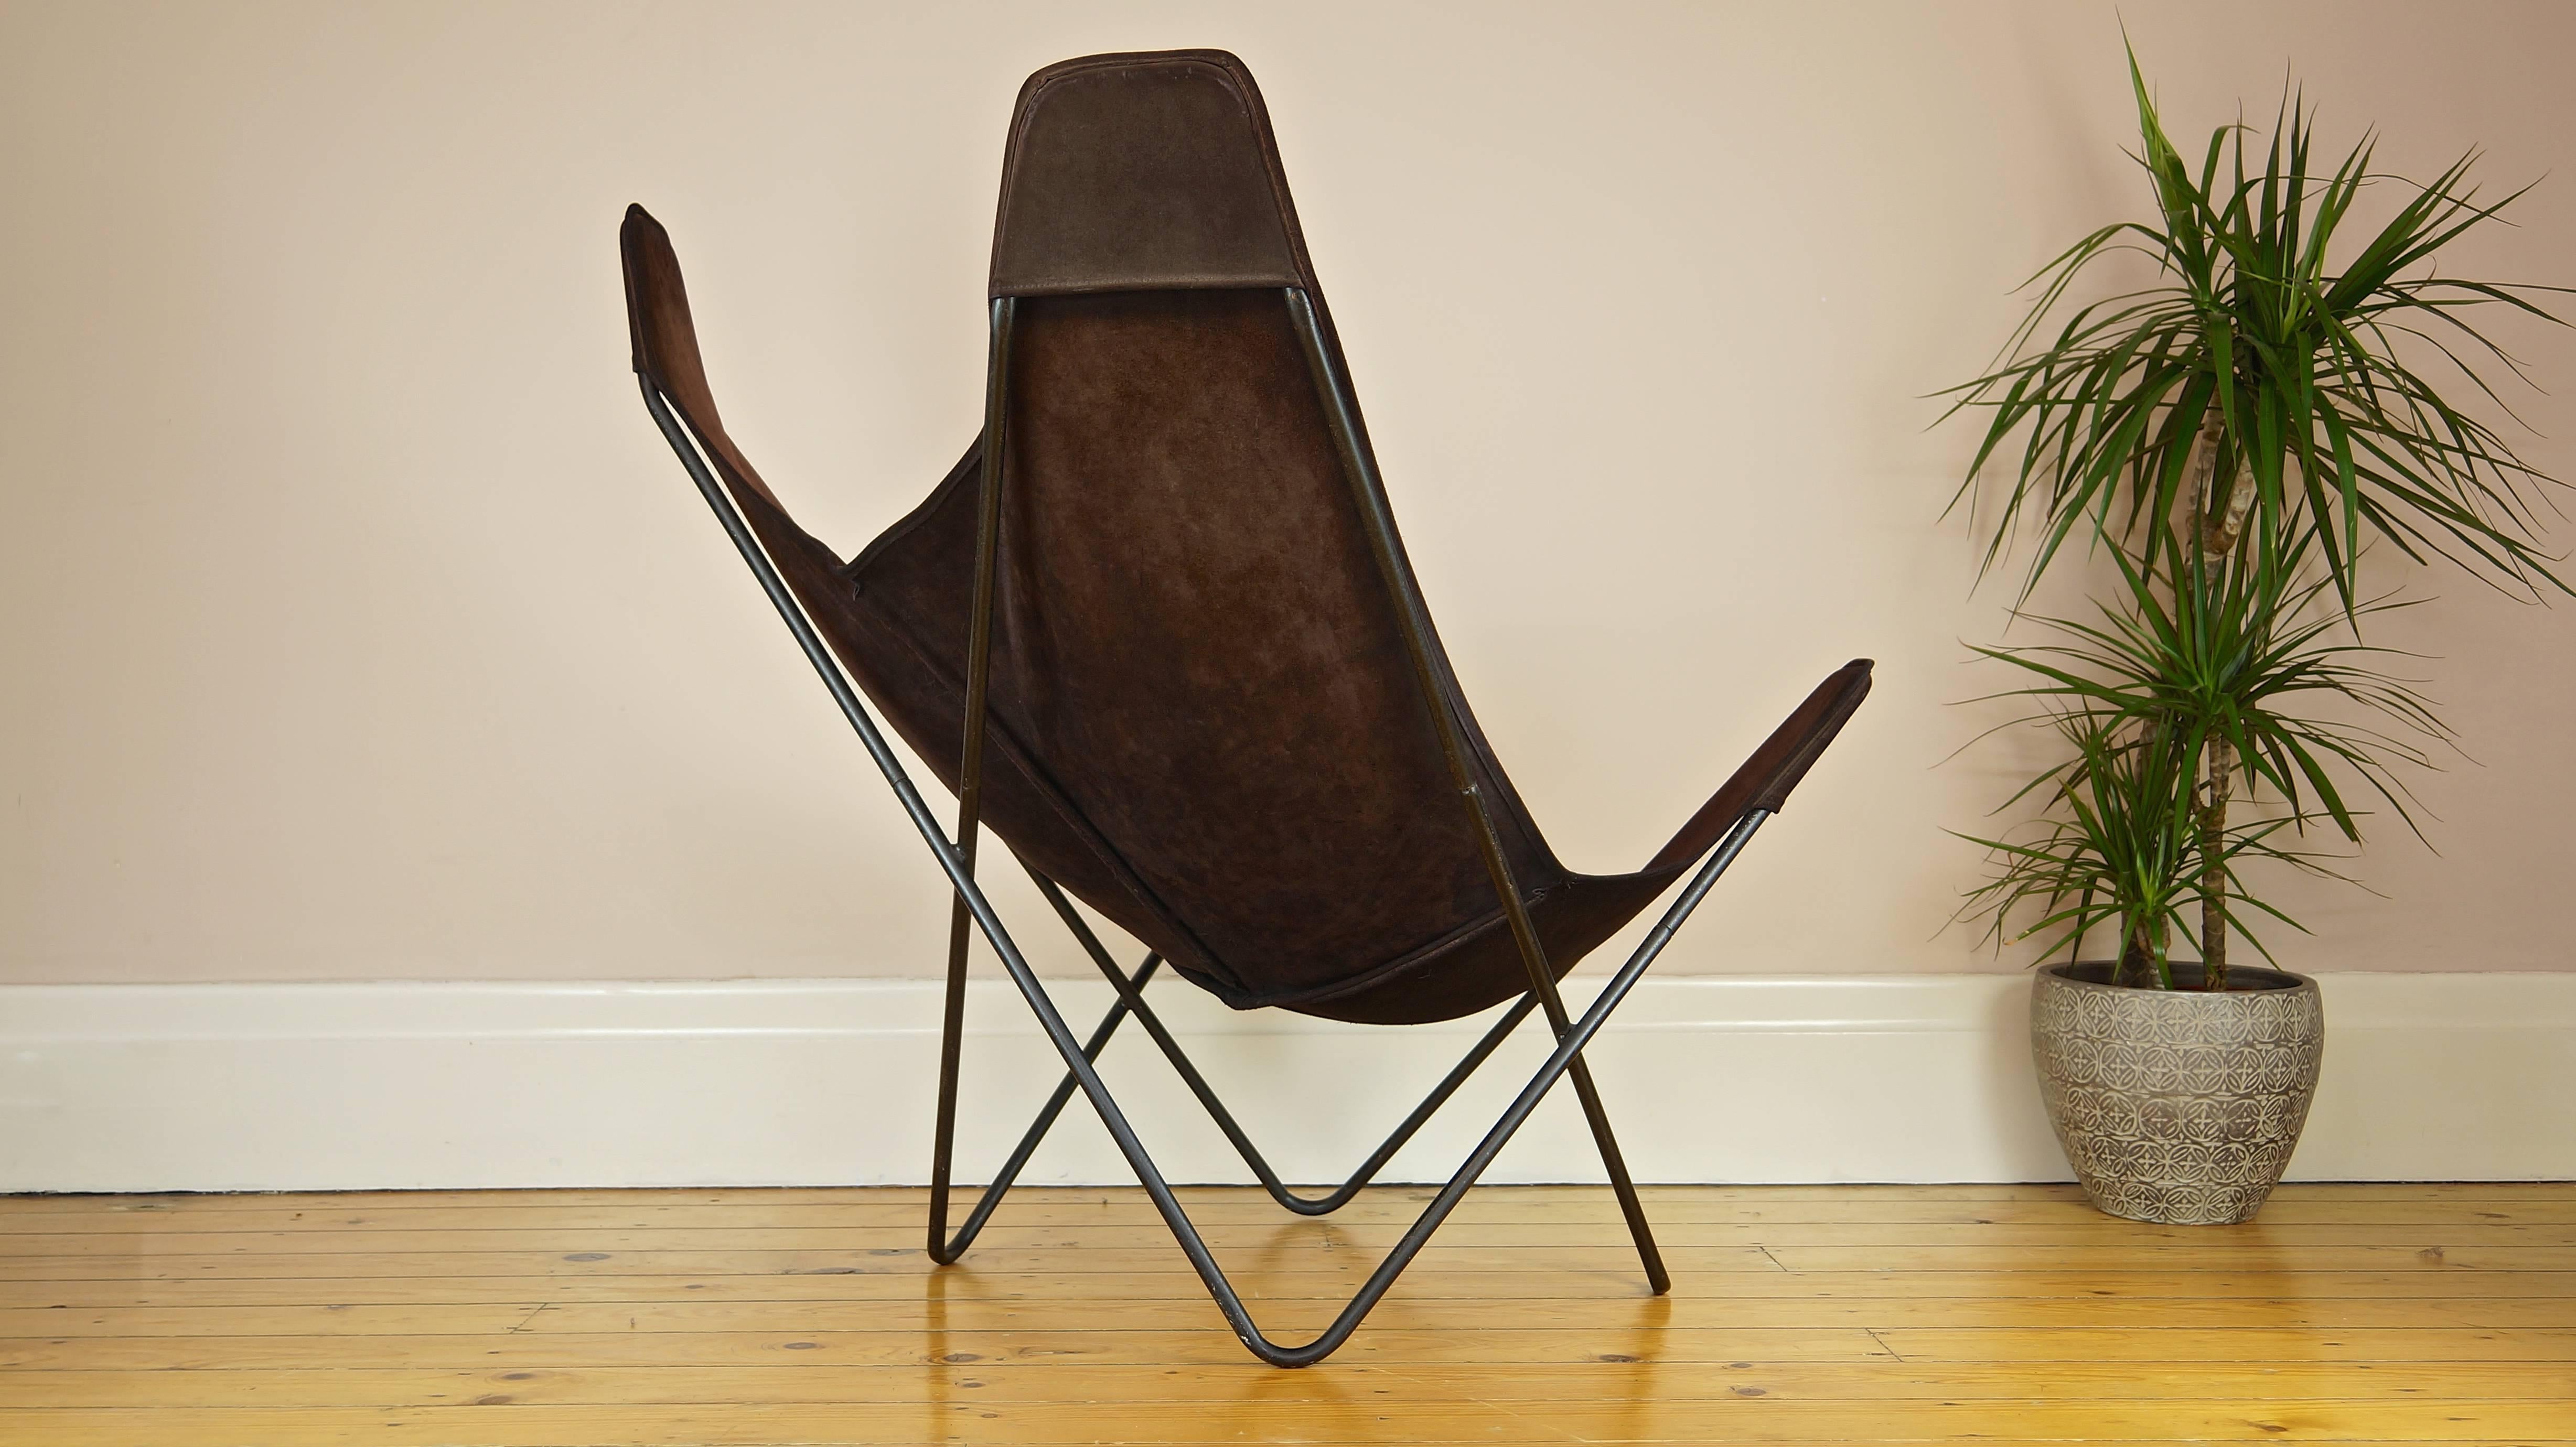 Mid-20th Century 1970s Knoll Butterfly Chair by Jorge Ferrari-Hardoy, Suede Leather Sling Chair